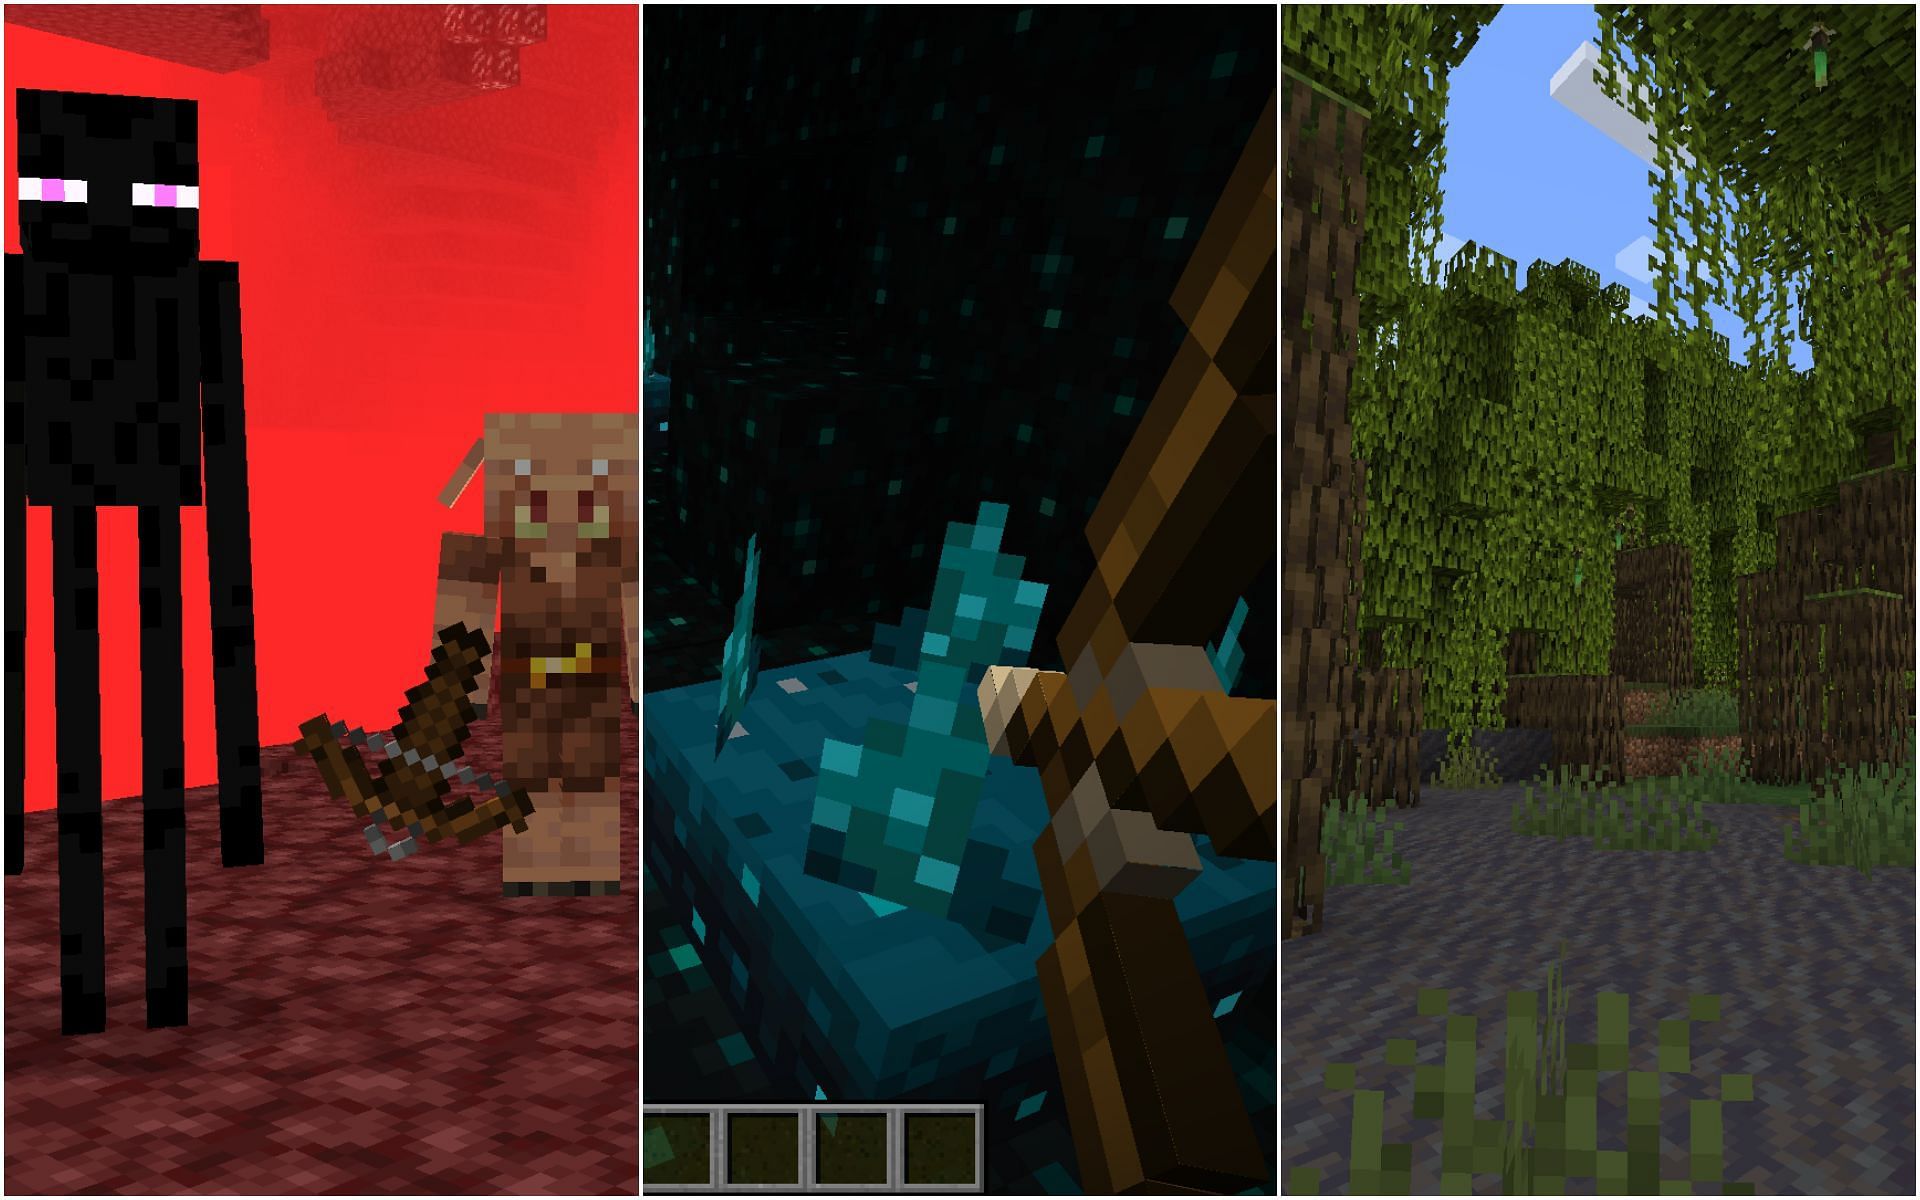 What's New in the Minecraft 1.16 Nether Update